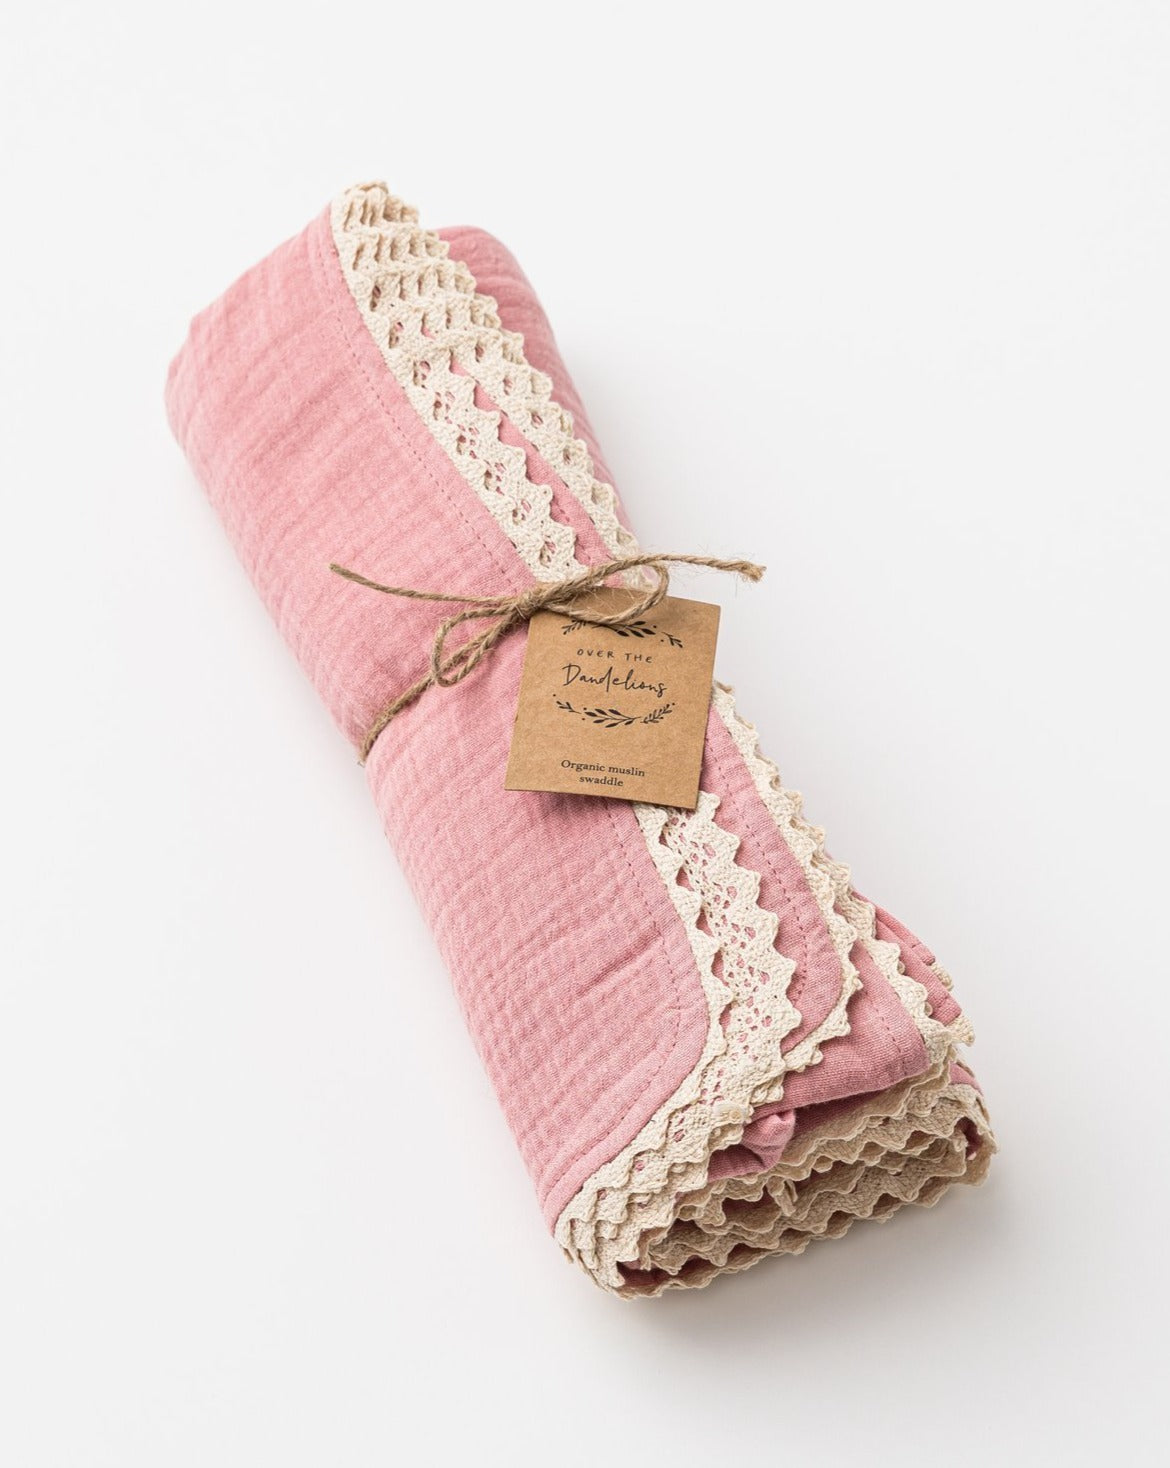 Over The Dandelions Organic Muslin Swaddle - Pink Lace